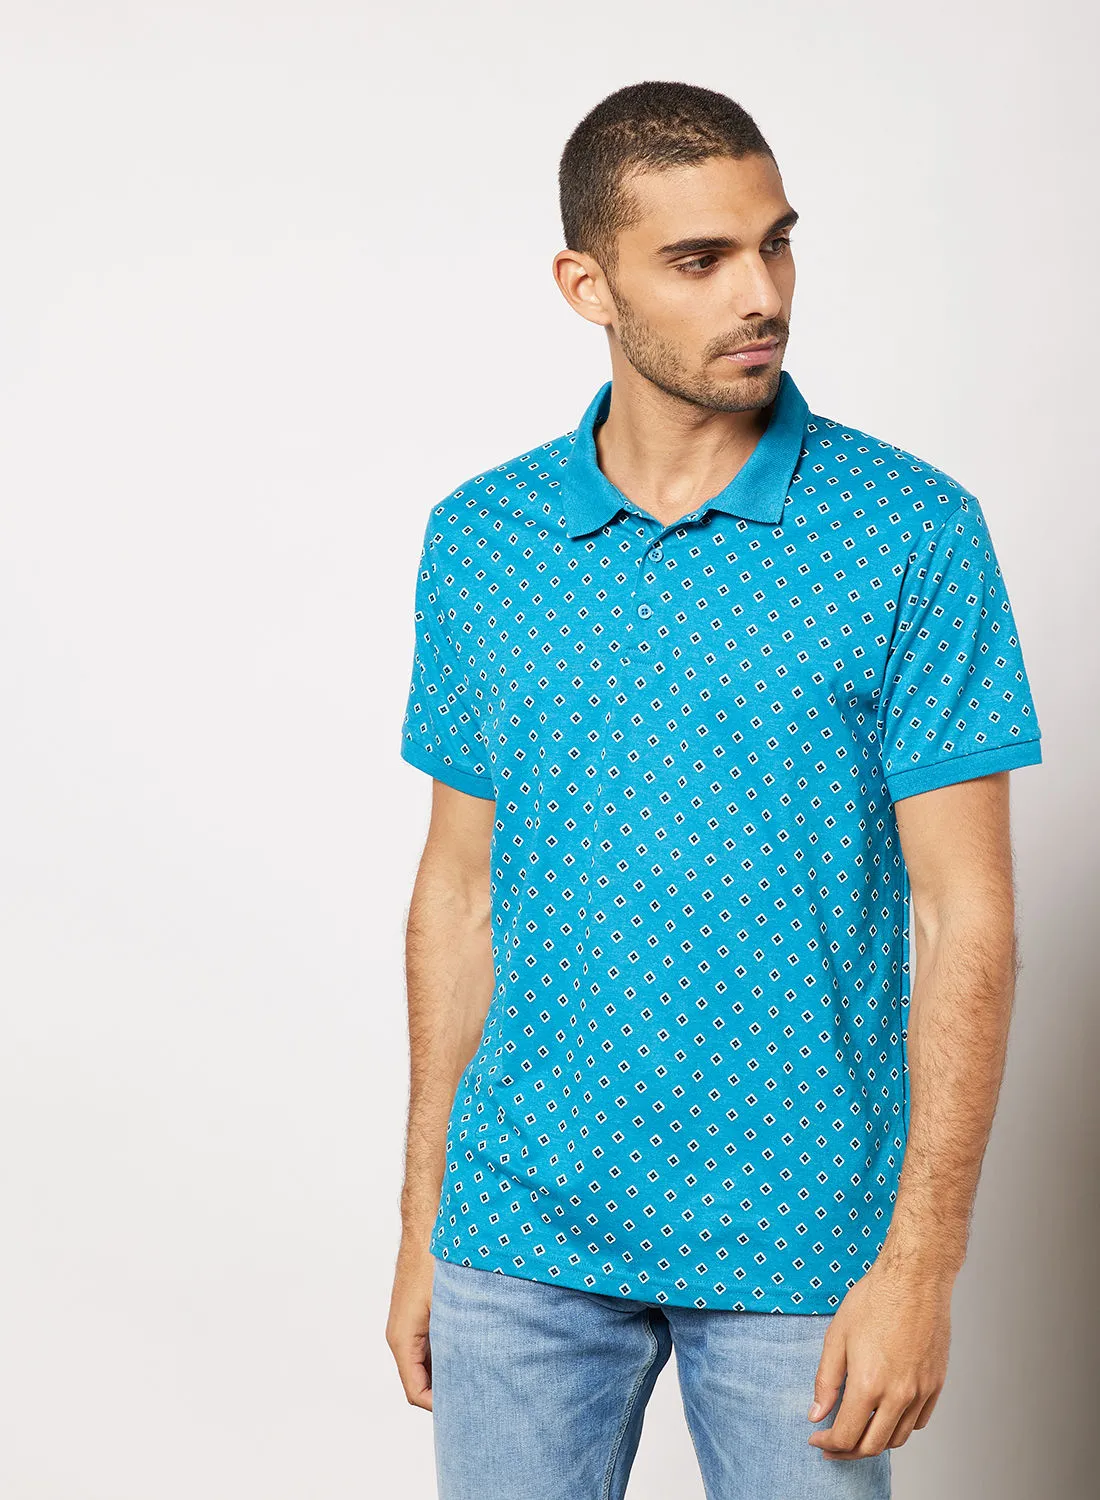 Noon East Men's Basic Casual Polo Printed Cotton T-Shirt in Regular Fit Half Sleeves Heather Light Blue